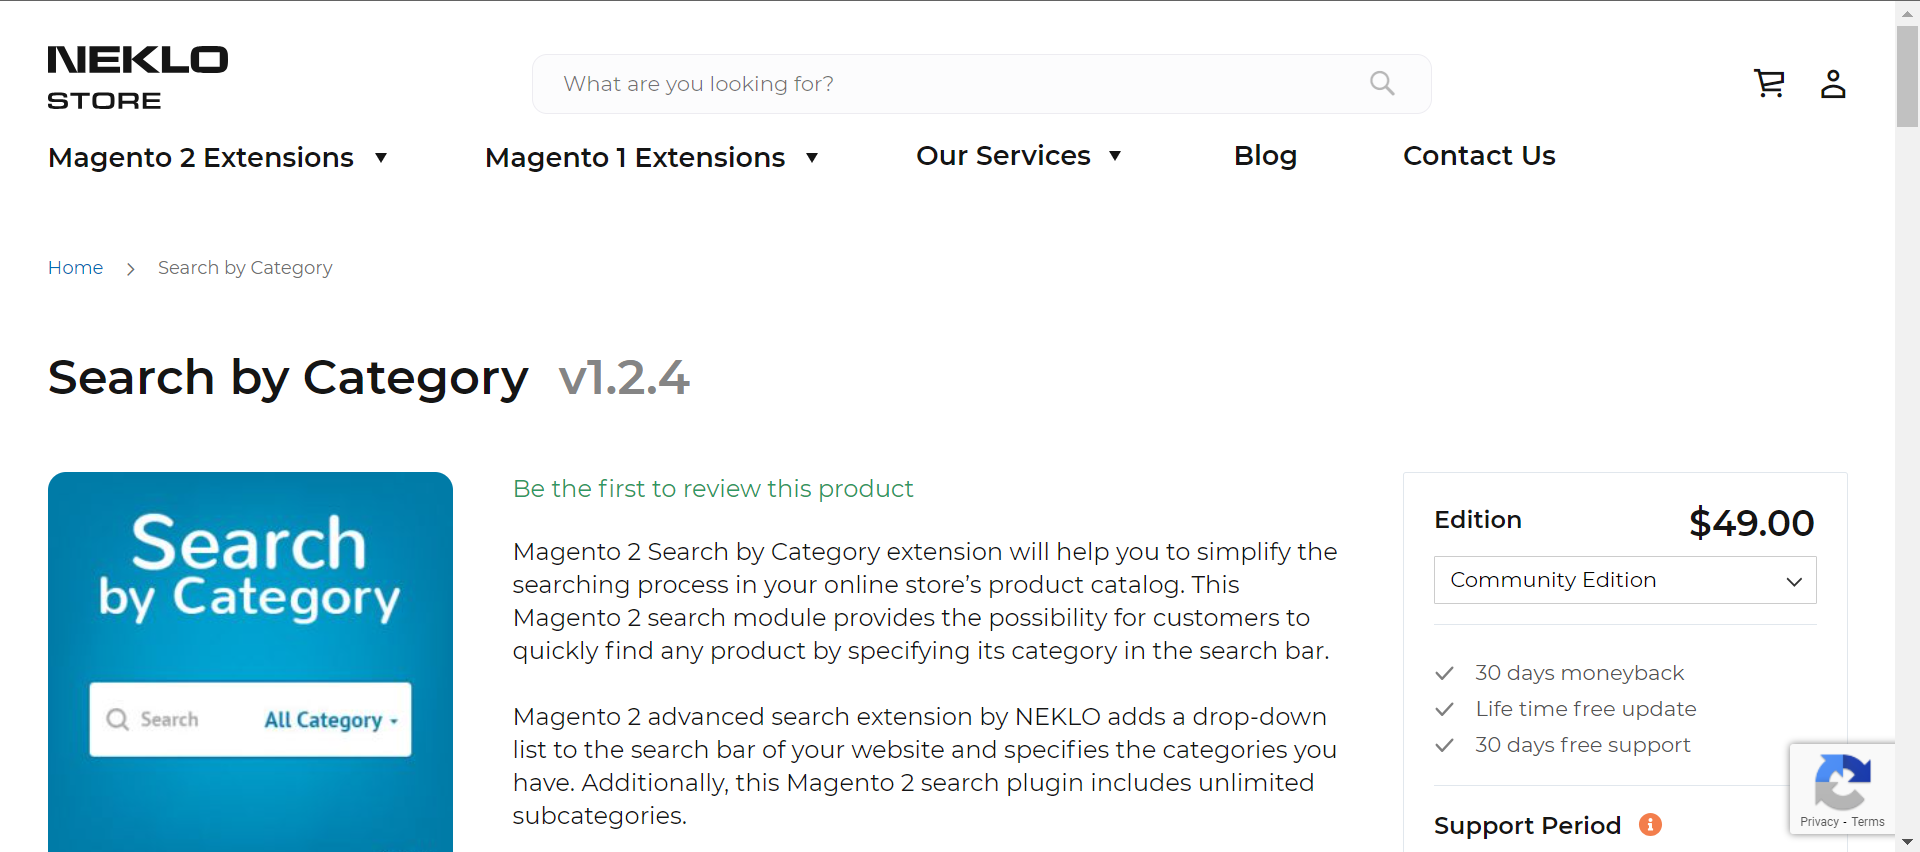 Magento SEO Extension - Neklo Search by Category